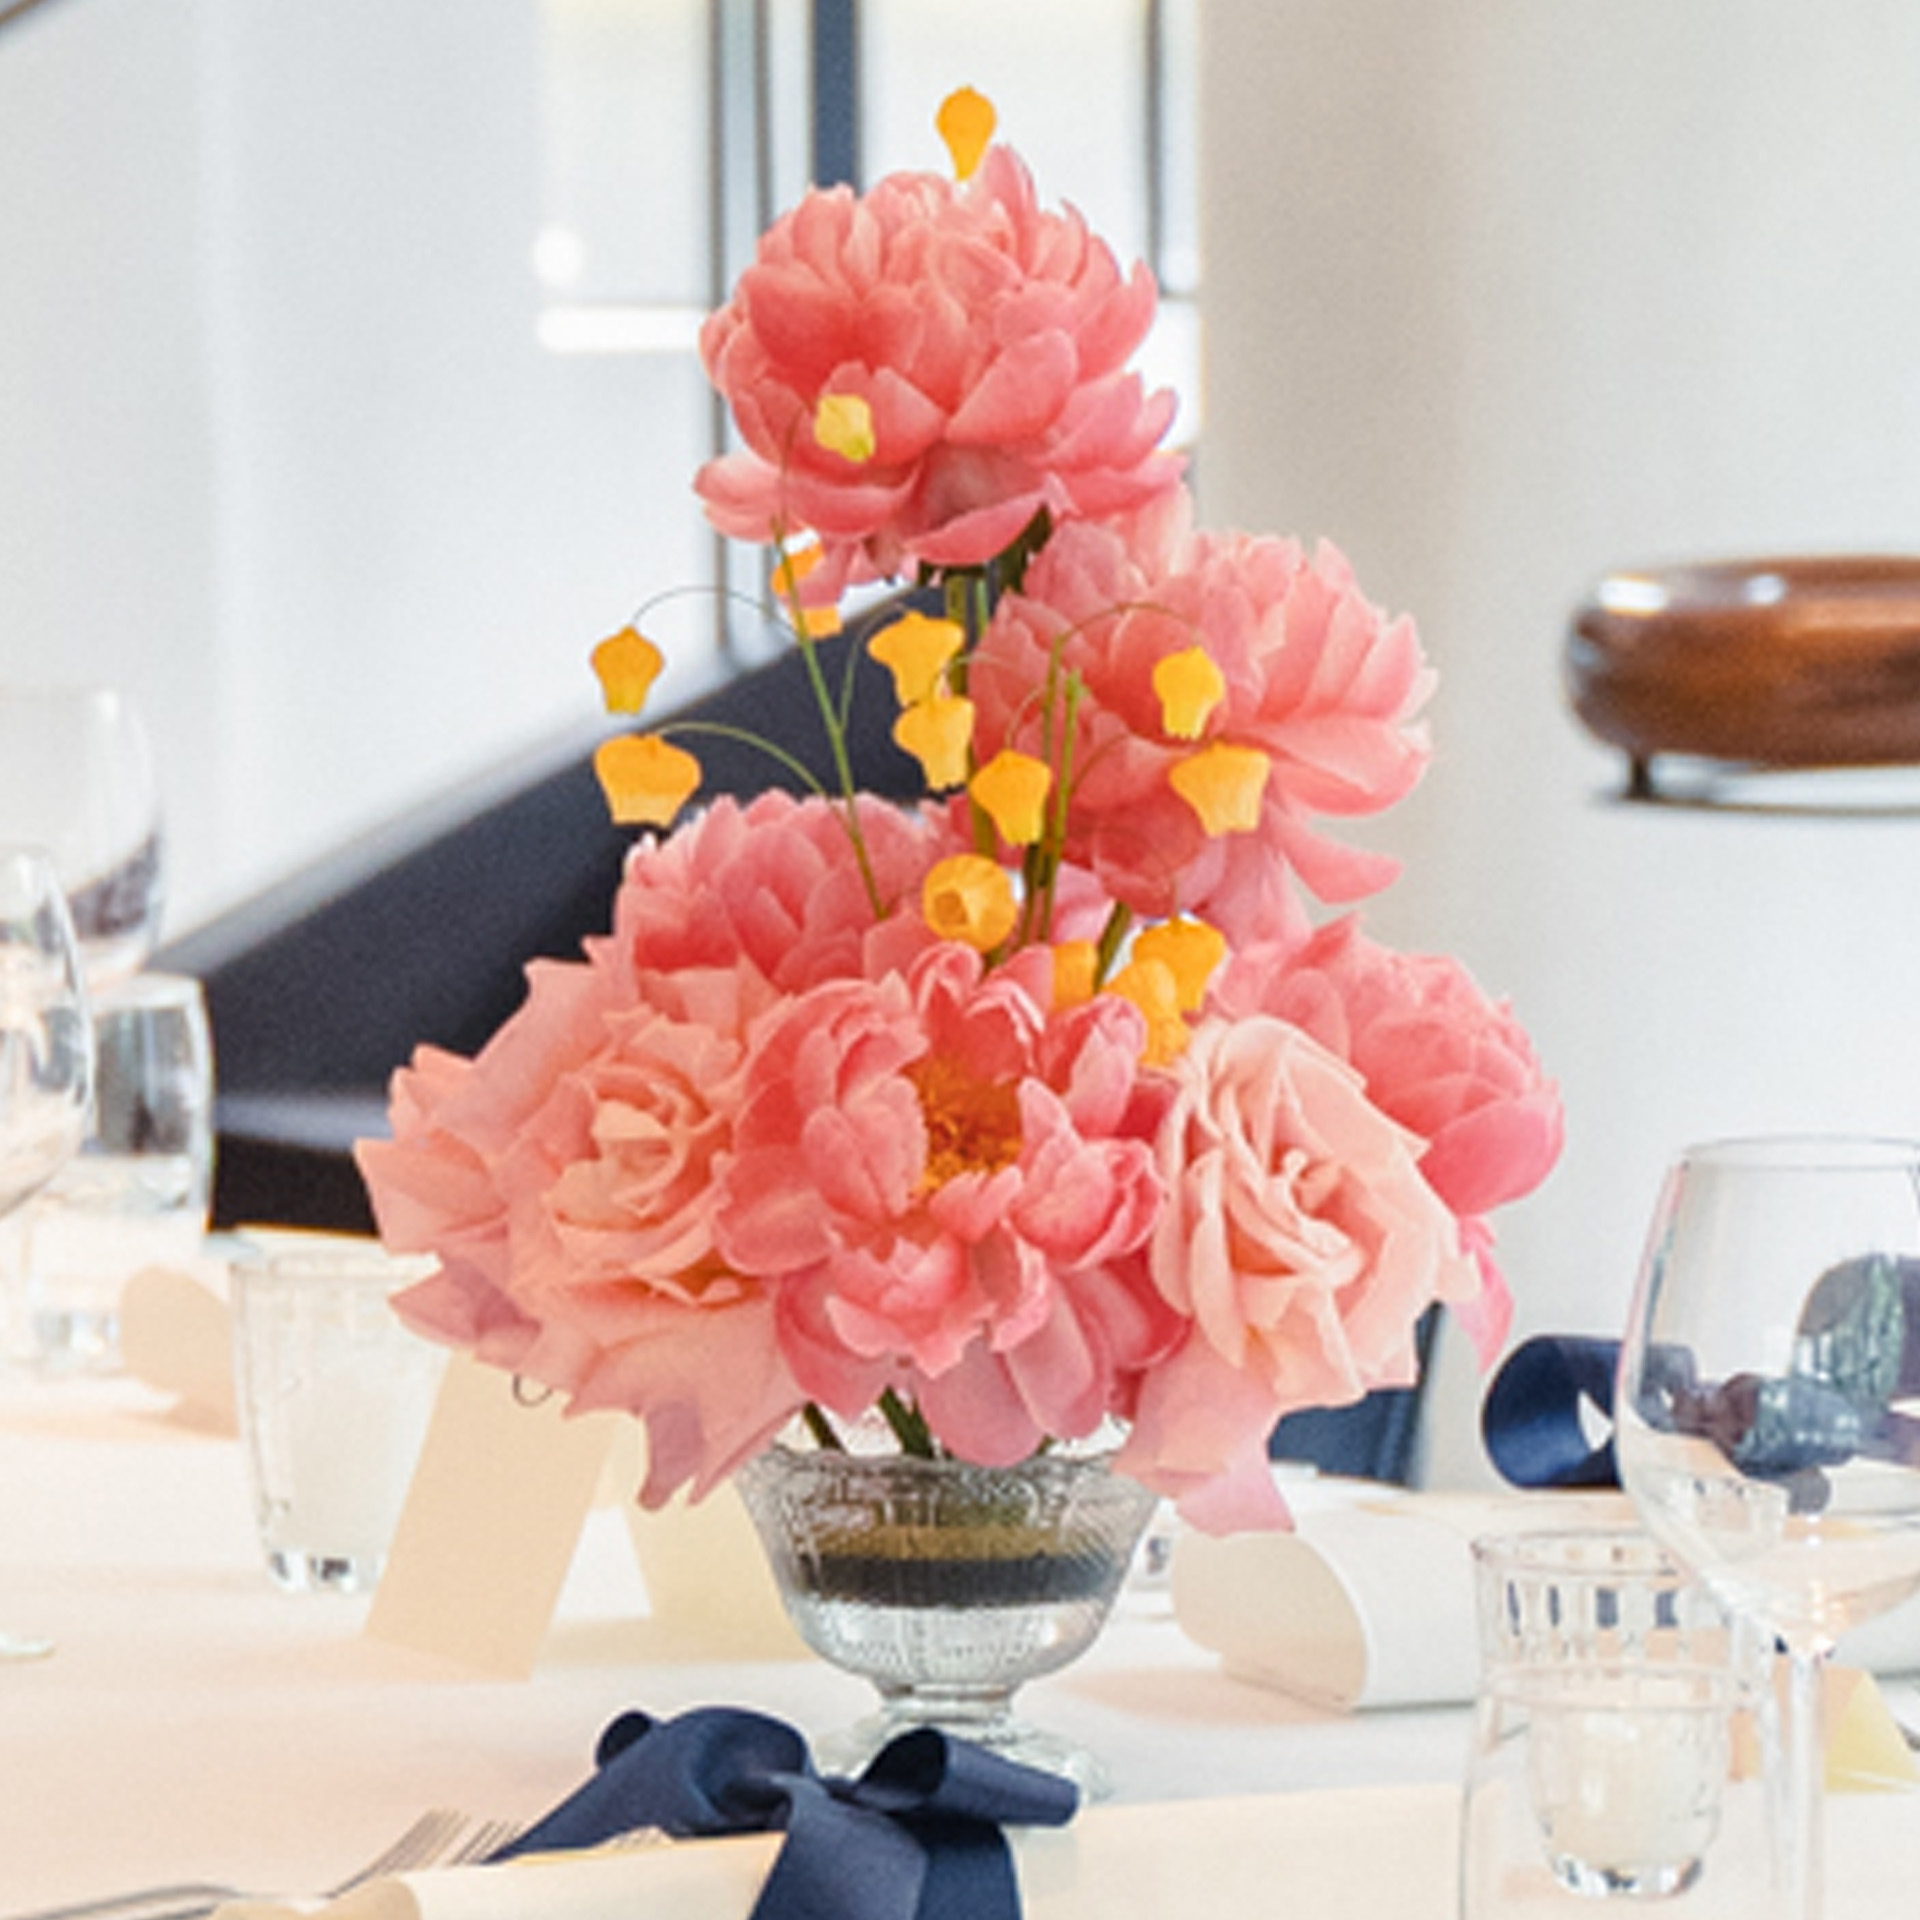 Here’s How Floral Design Can Bloom From Passion to Business